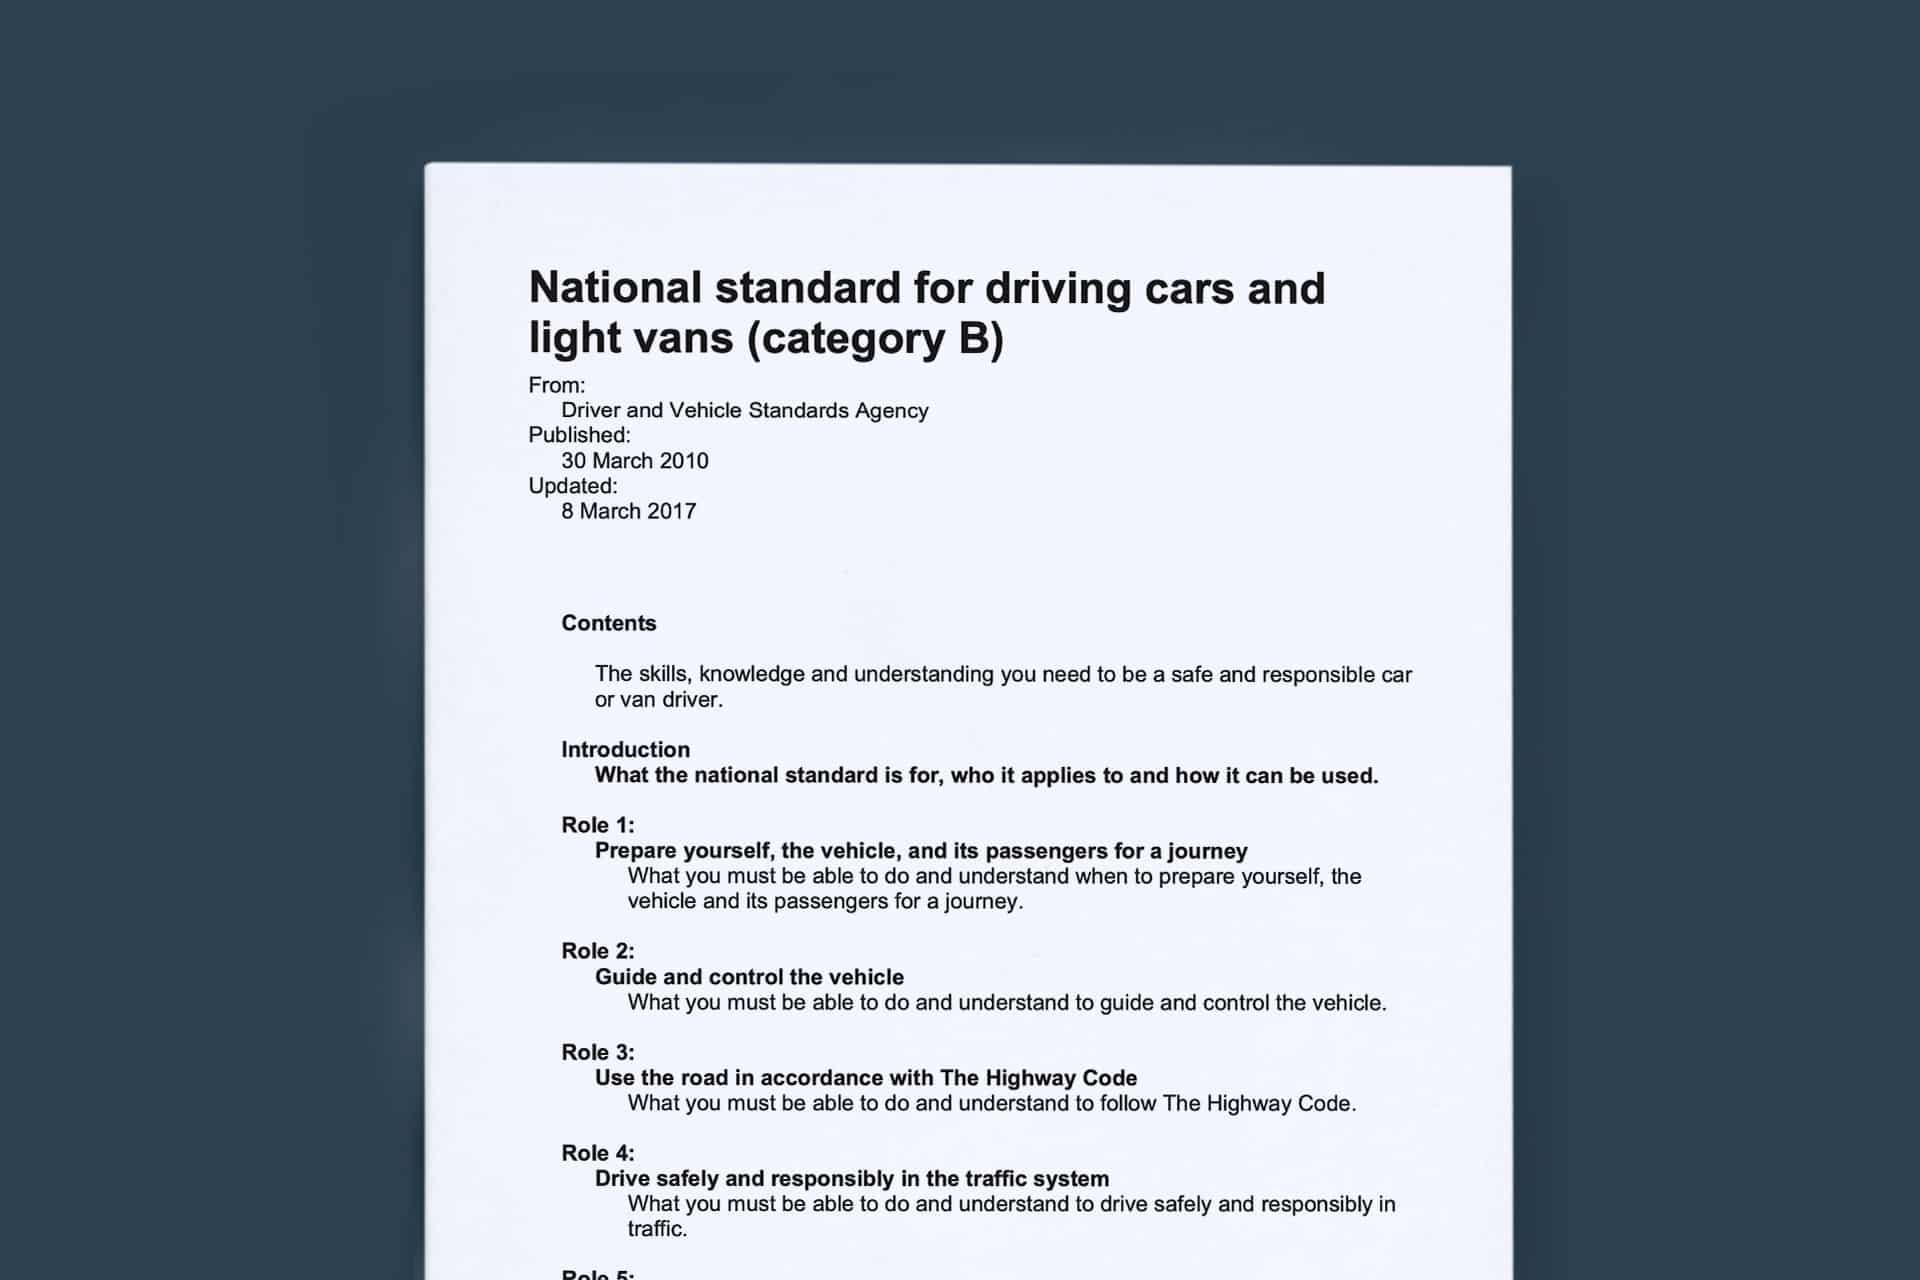 National Standard – Driving Cars and Light Vans